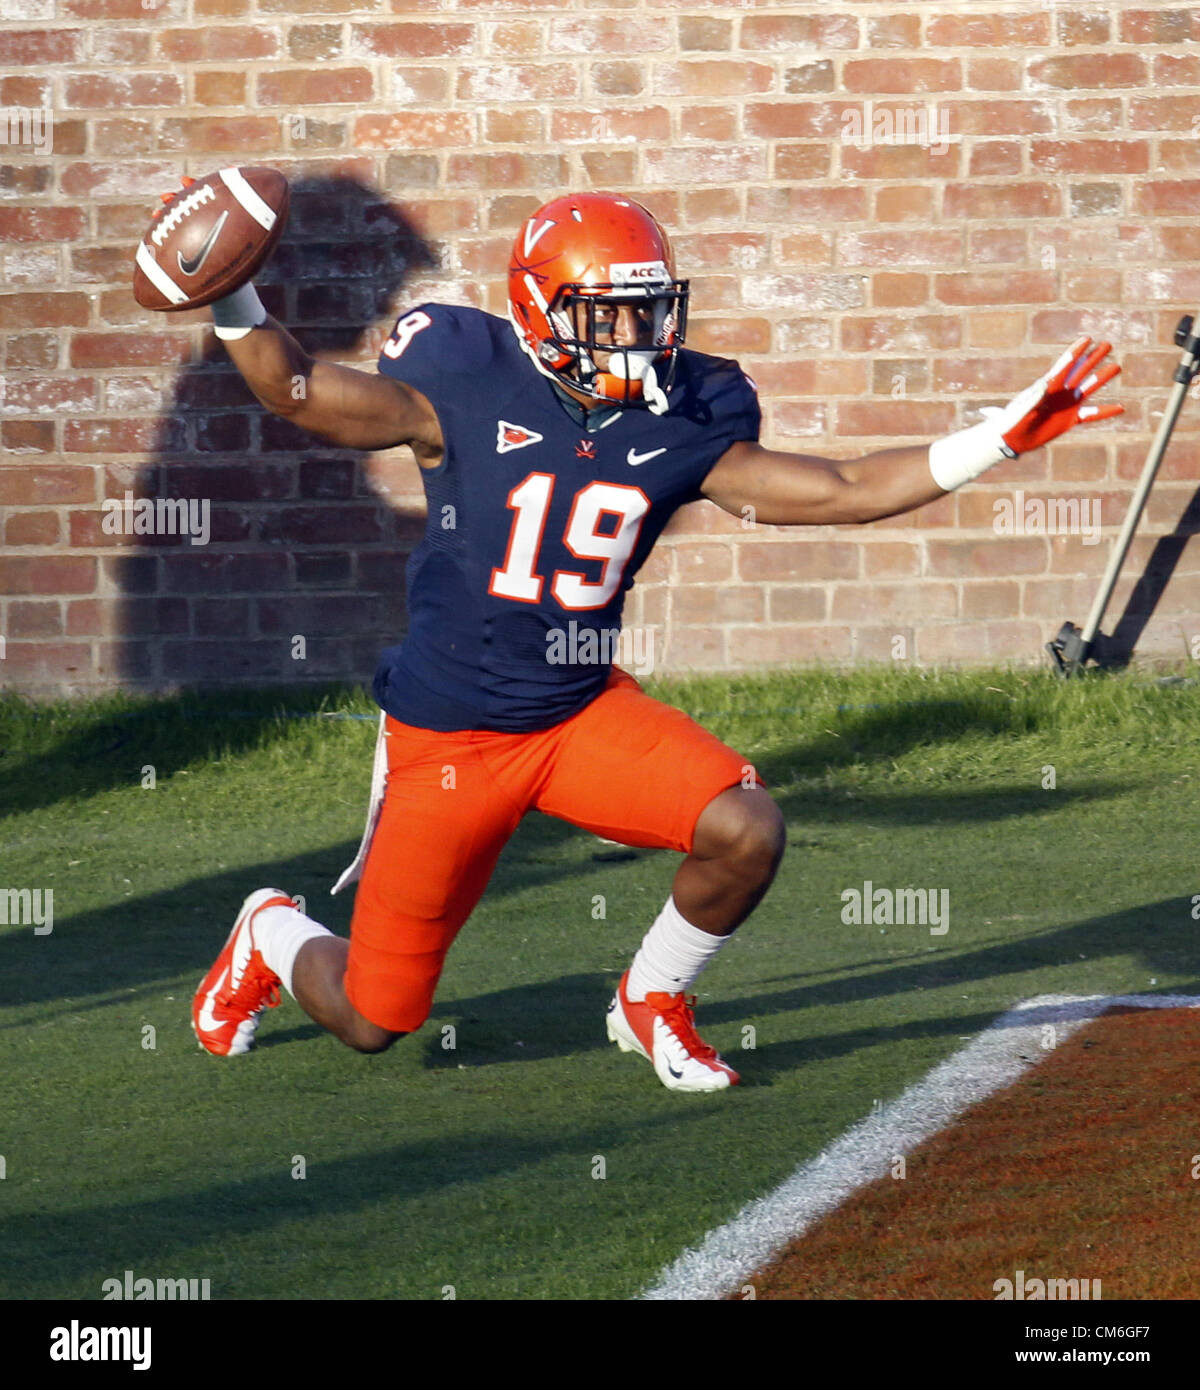 Oct. 13, 2012 - Charlottesville, Va, USA - Virginia Cavaliers wide receiver E.J. Scott (19) celebrates a touchdown catch during the game against Maryland in Charlottesville, Va. Maryland defeated Virginia 27-20. (Credit Image: © Andrew Shurtleff/ZUMAPRESS.com) Stock Photo